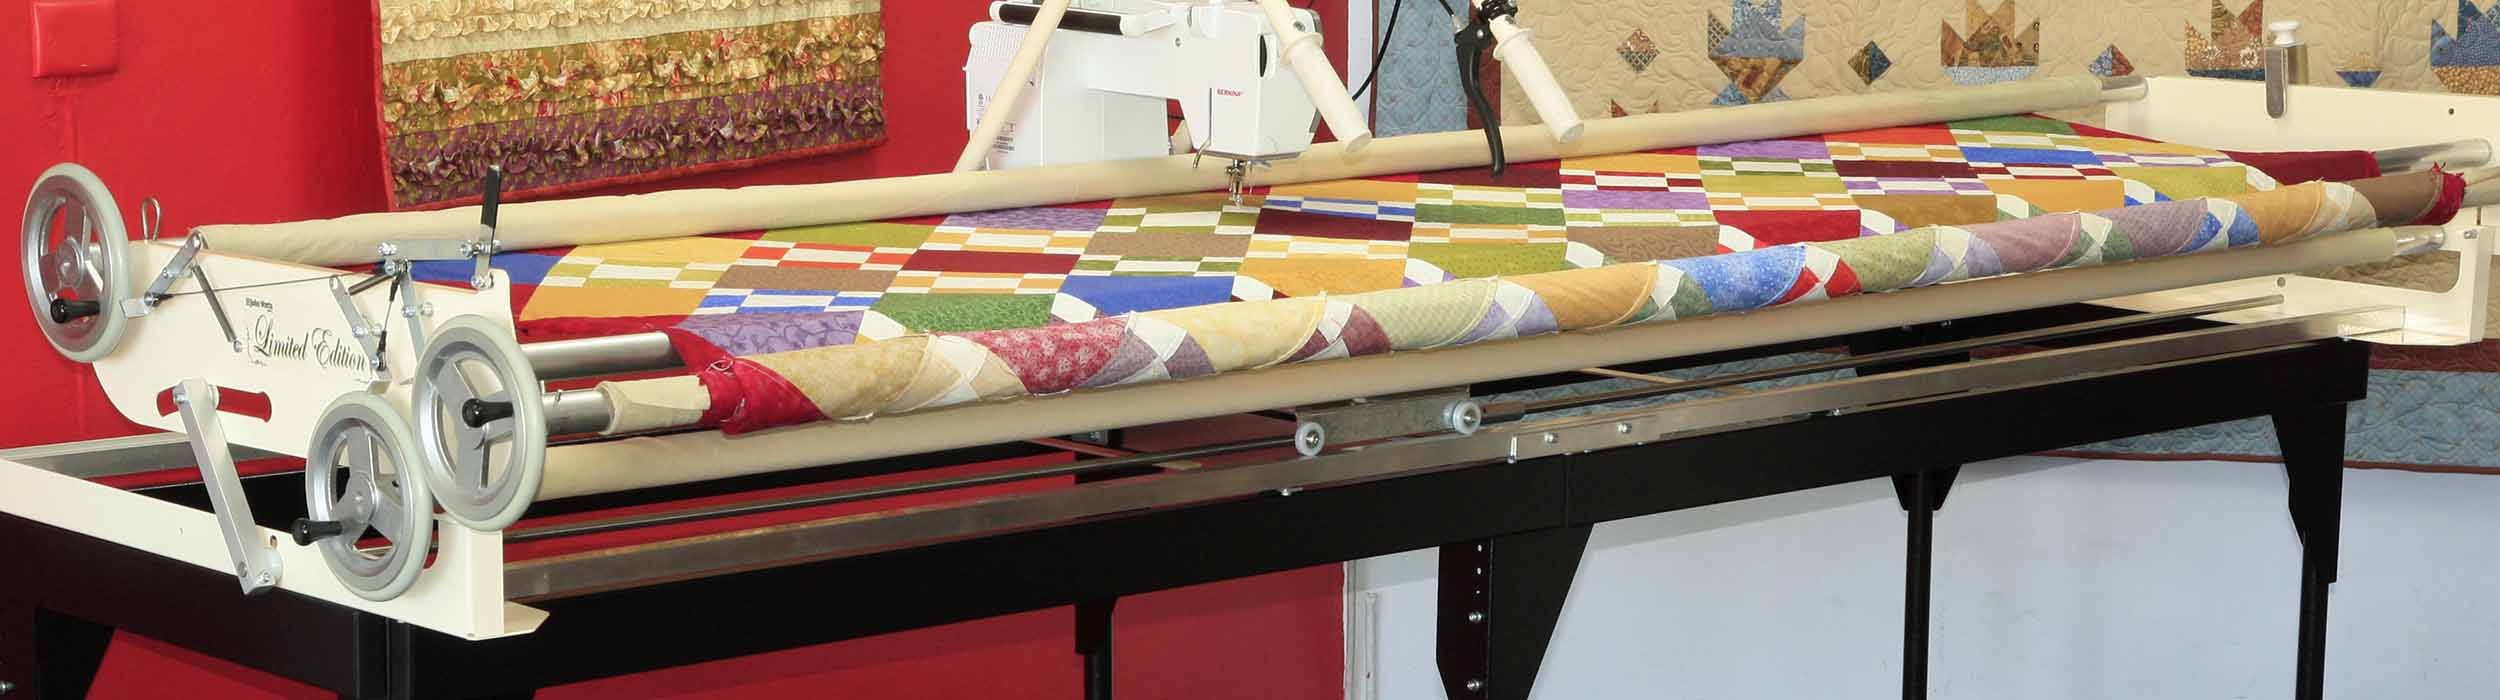 quilting frame